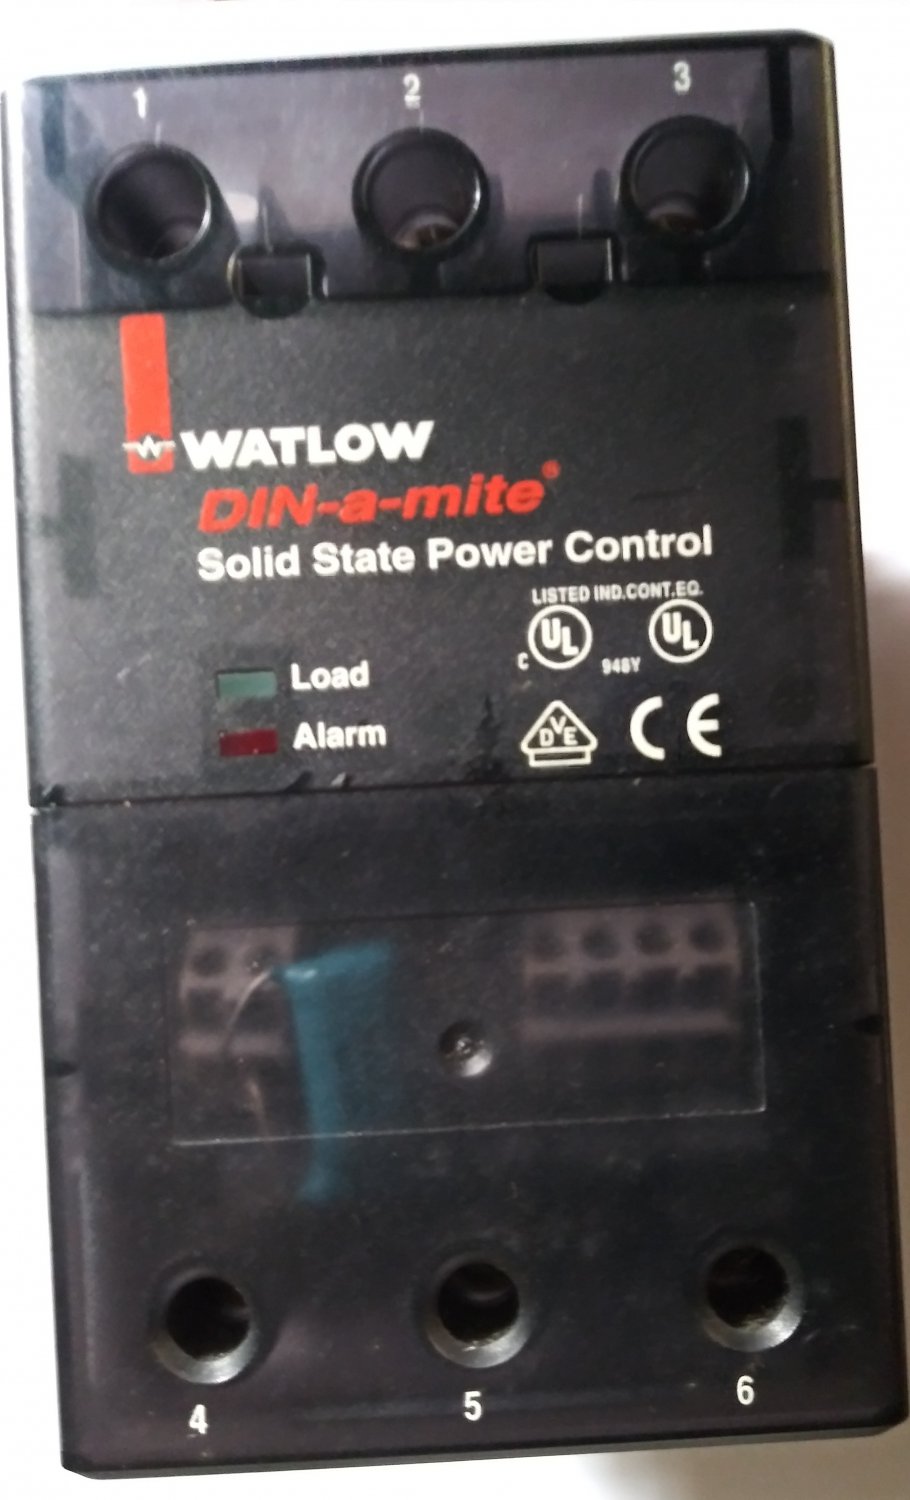 Watlow Din-a-mite Solid State power Control - 3 phase